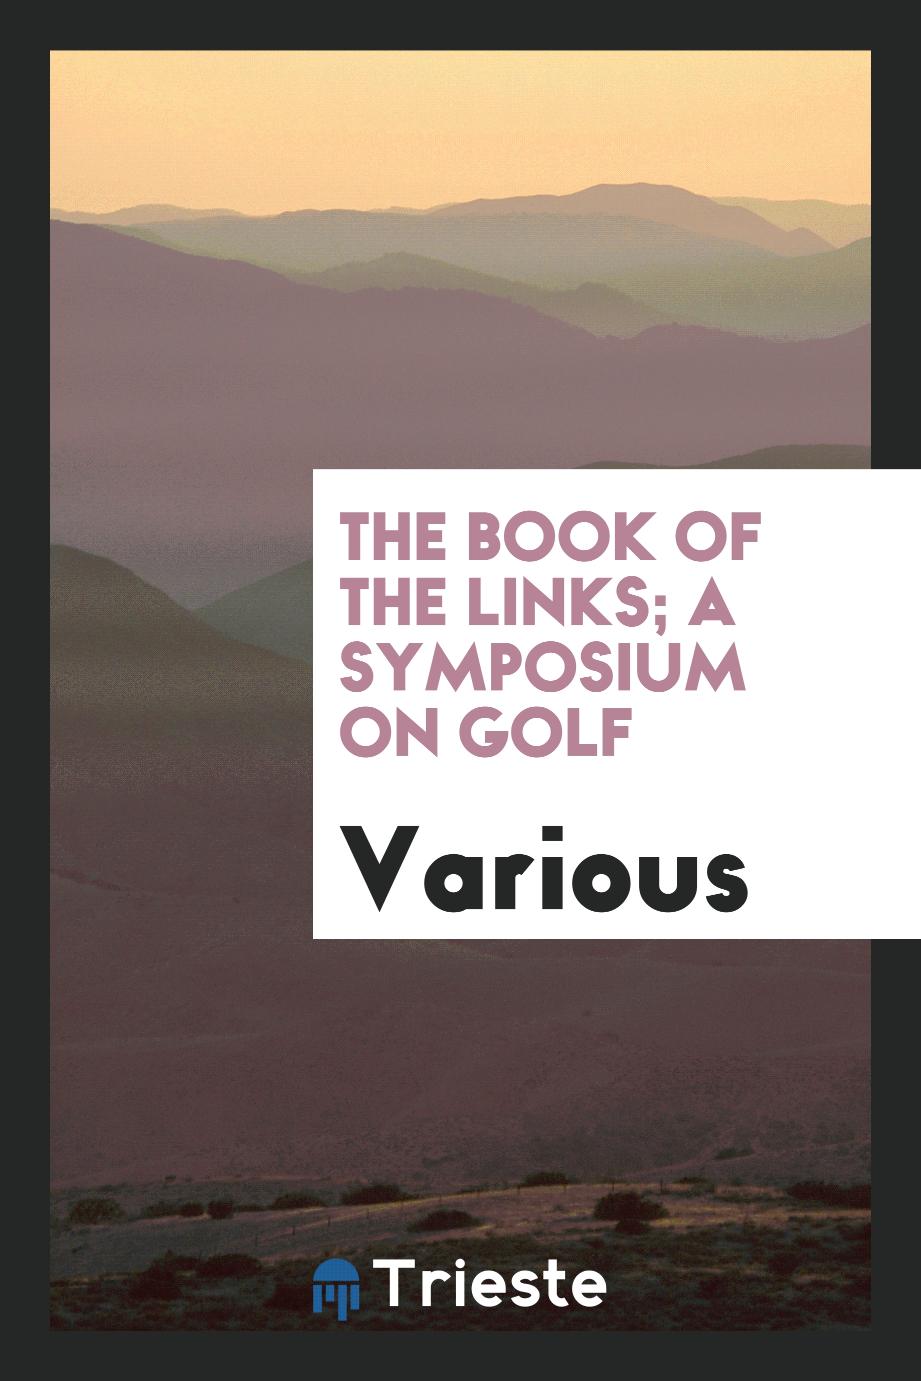 The book of the links; a symposium on golf